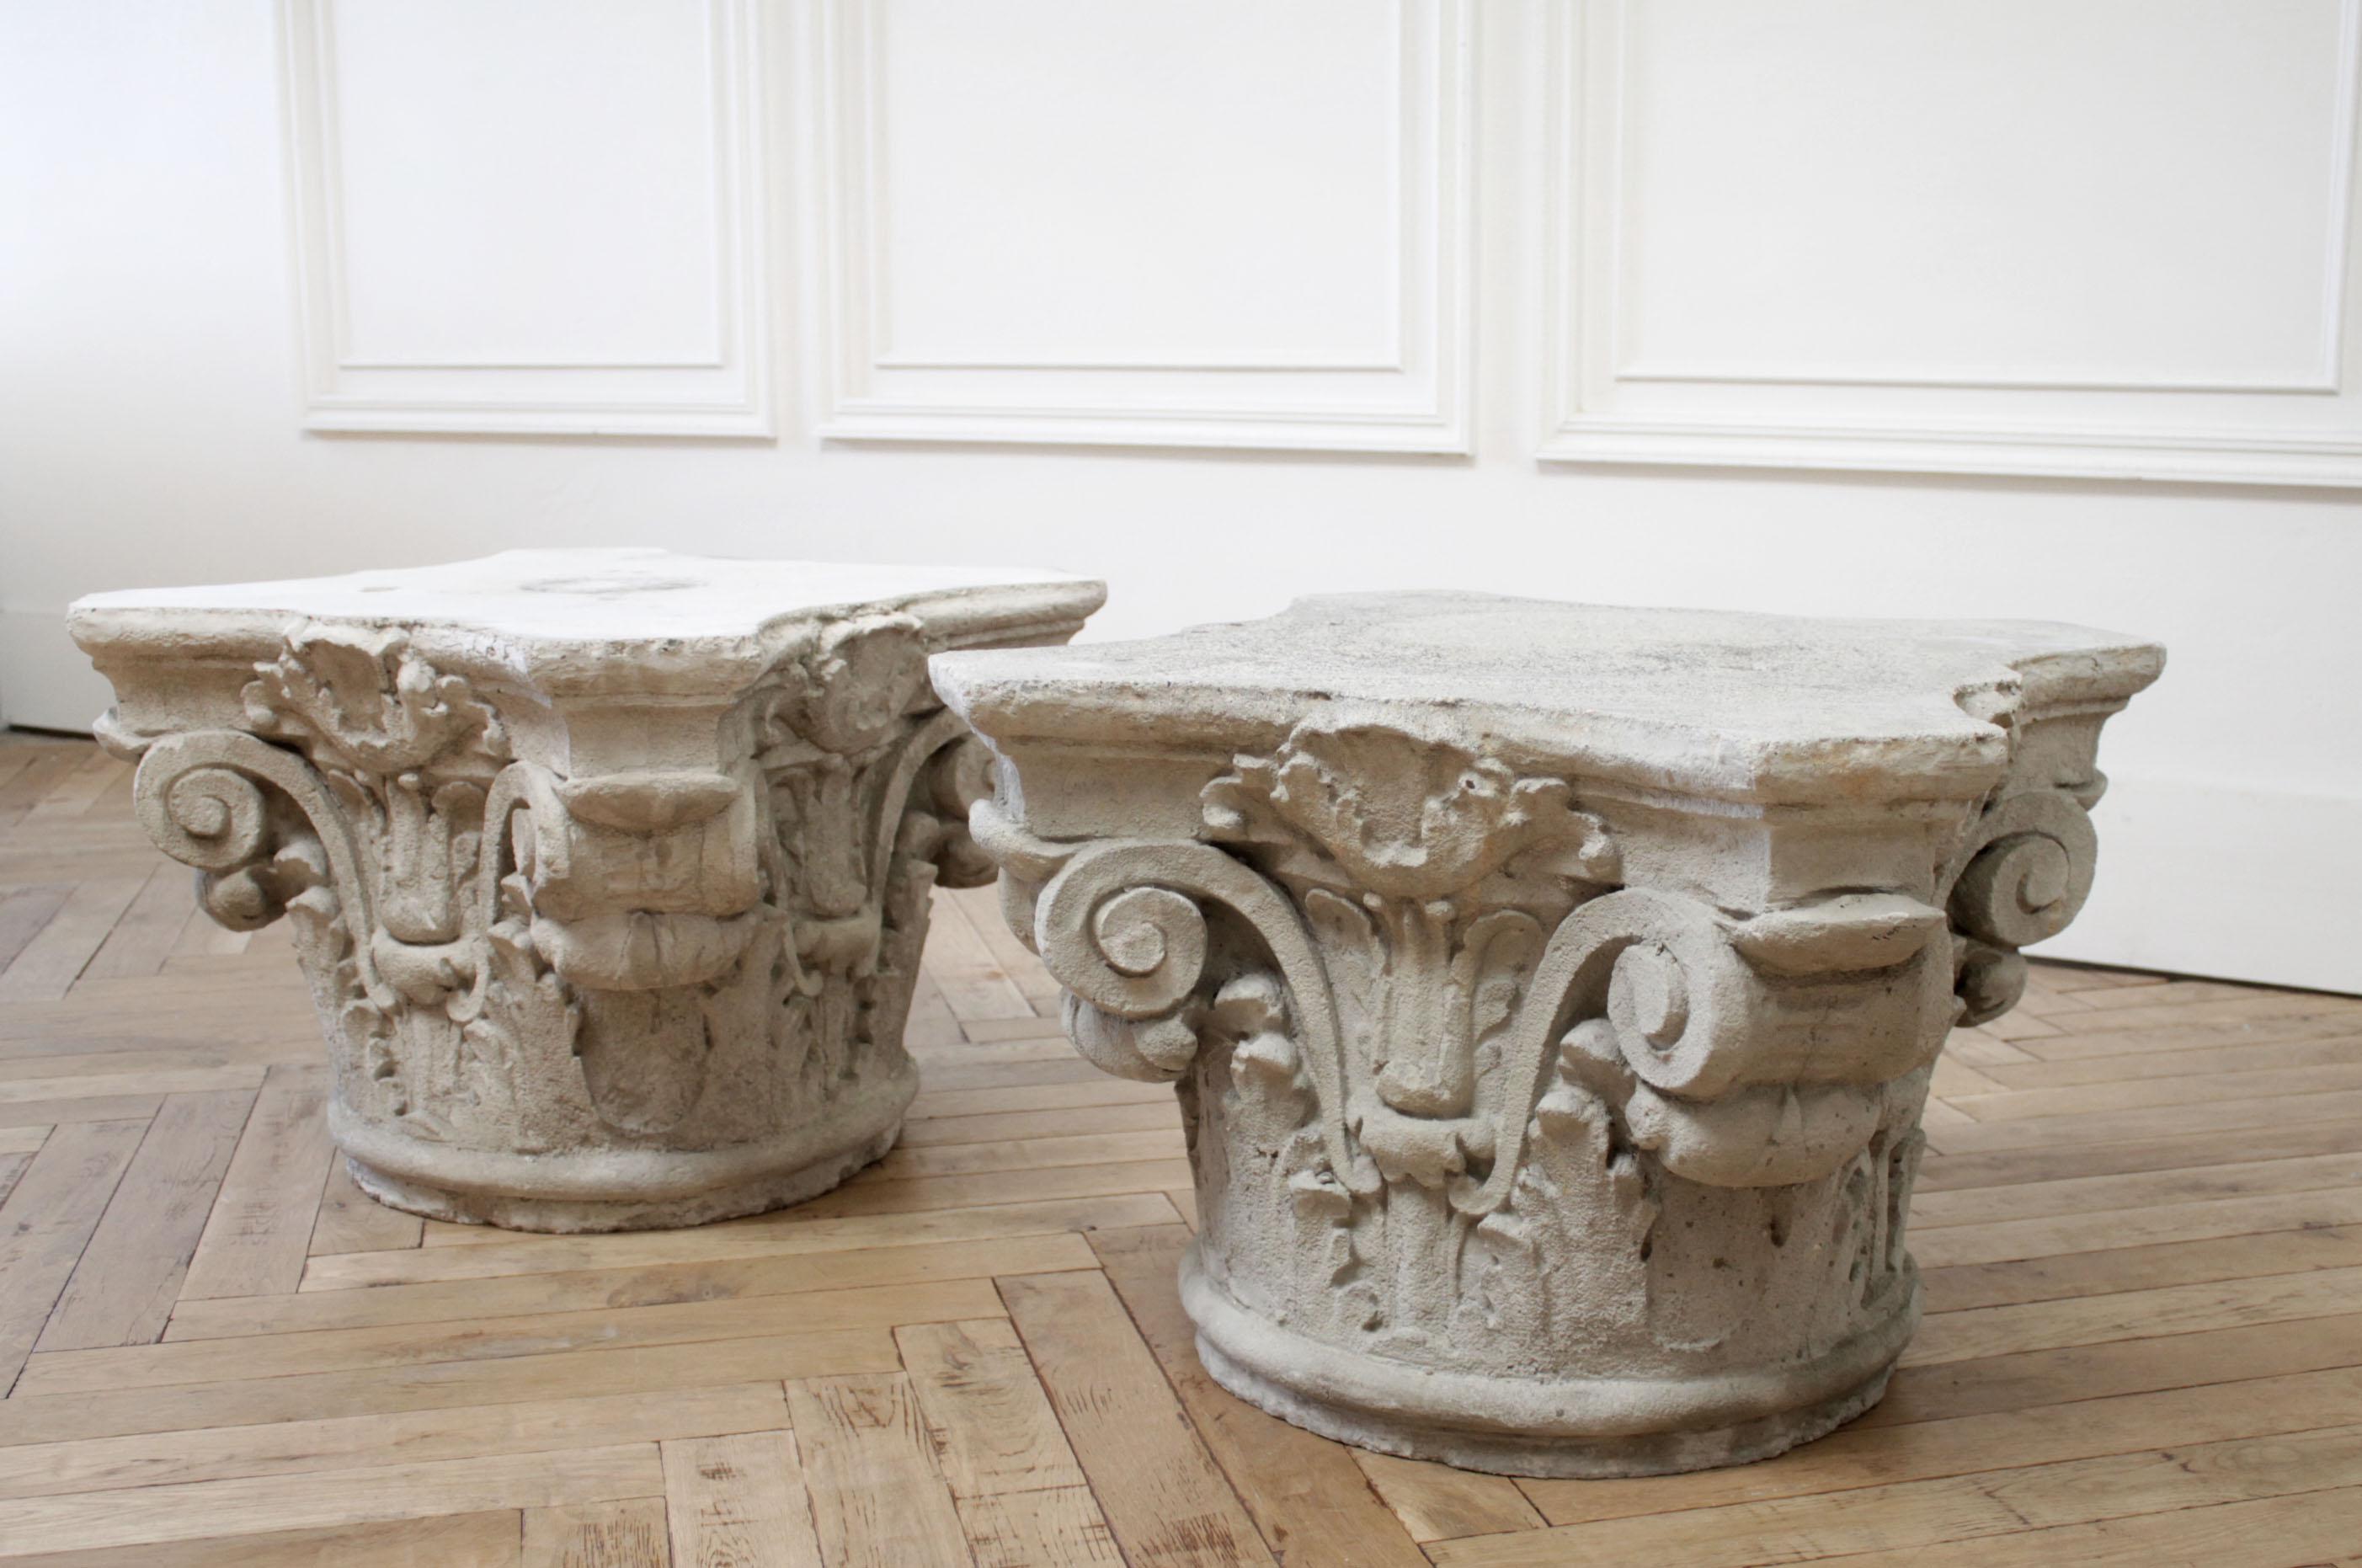 Pair of cast stone garden pedestals or outdoor tables
Beautiful capitol style garden tables, use the pair as coffee tables, side tables, or as a pedestal for your garden urns.
Size: 29